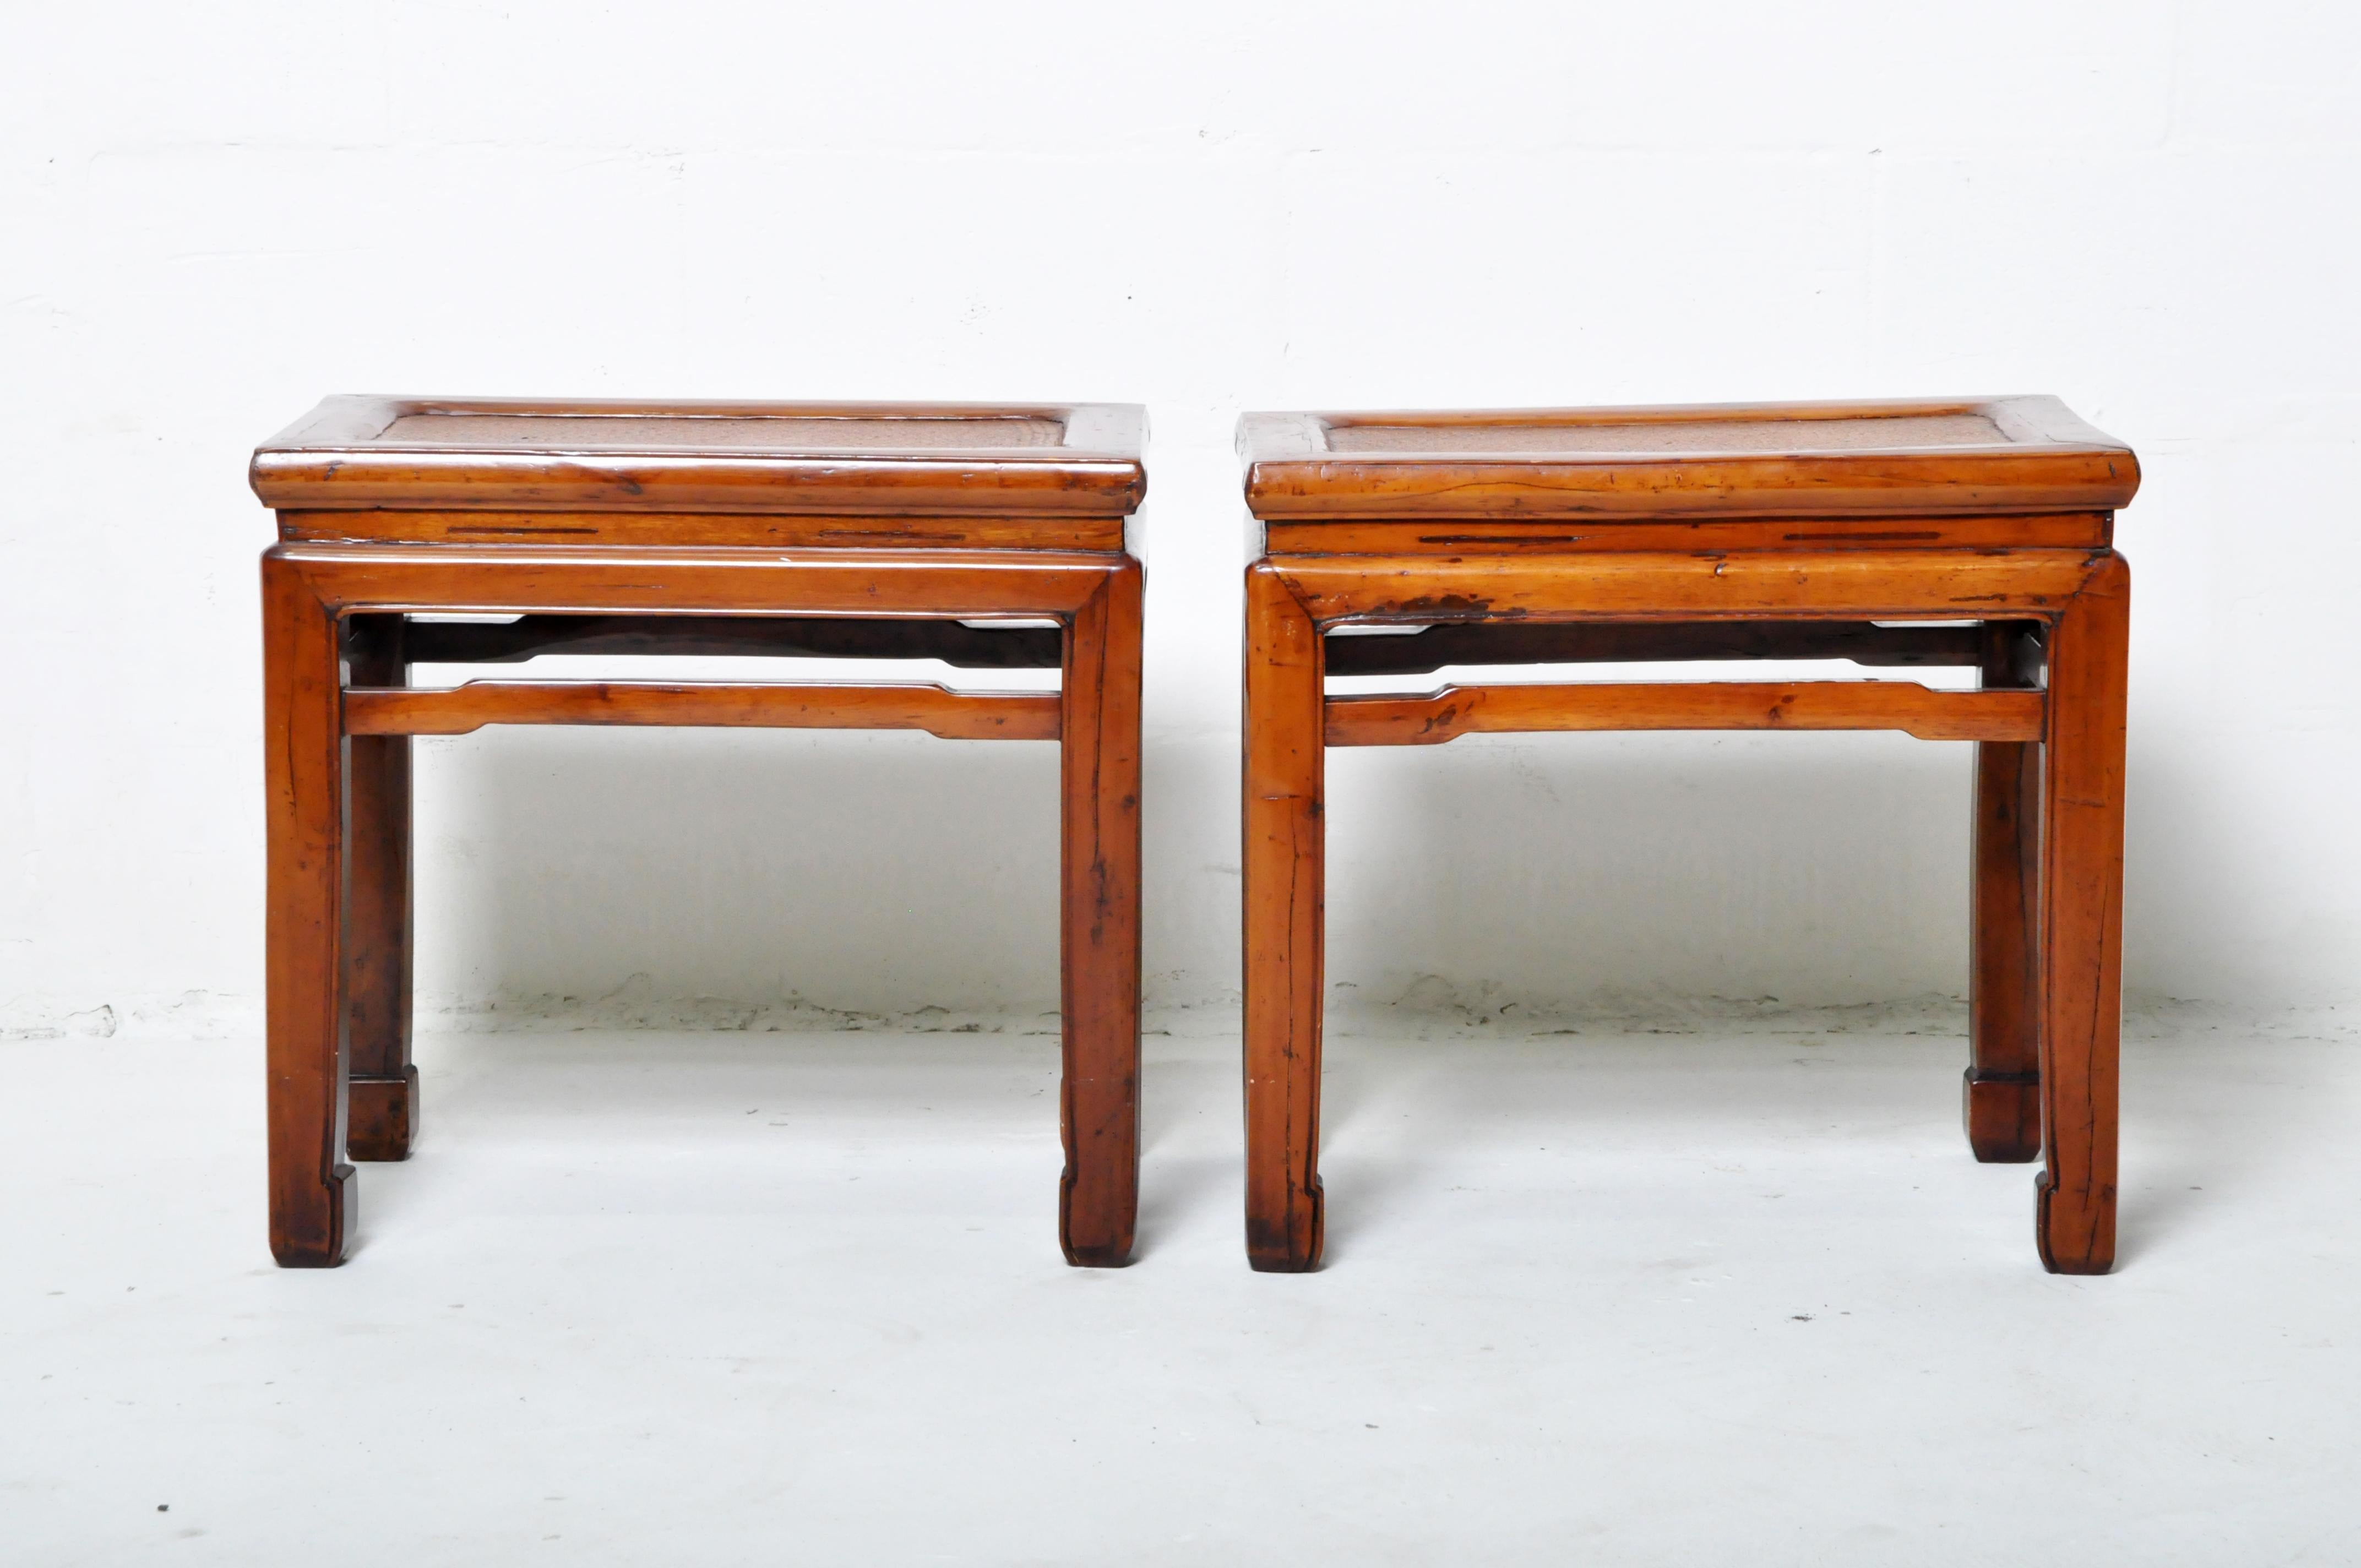 These classic Chinese stools feature mortise-and-tenon joinery and woven cane tops. They are made from sturdy and lightweight Cypress wood, carefully selected to be clear of knots. The original lacquer (likely oxblood) has worn away and been